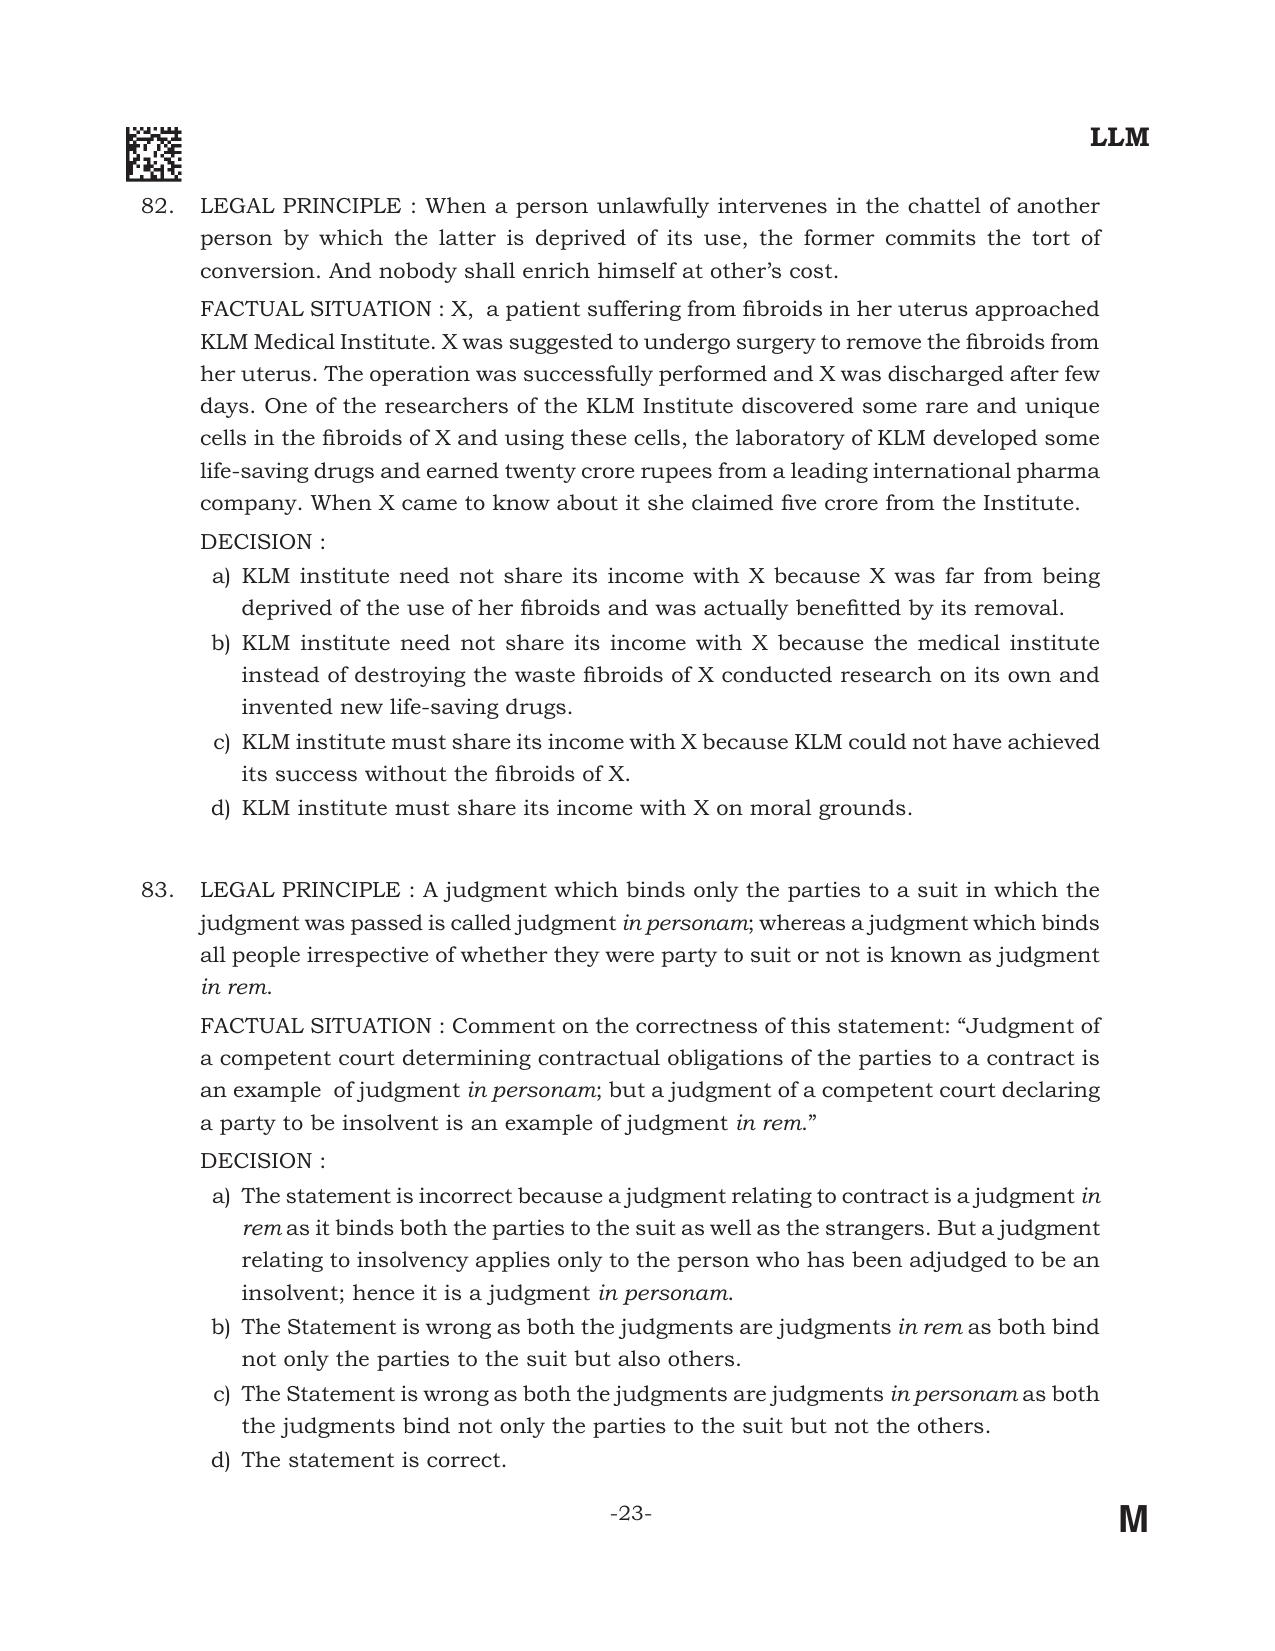 AILET 2022 Question Paper for LL.M - Page 23